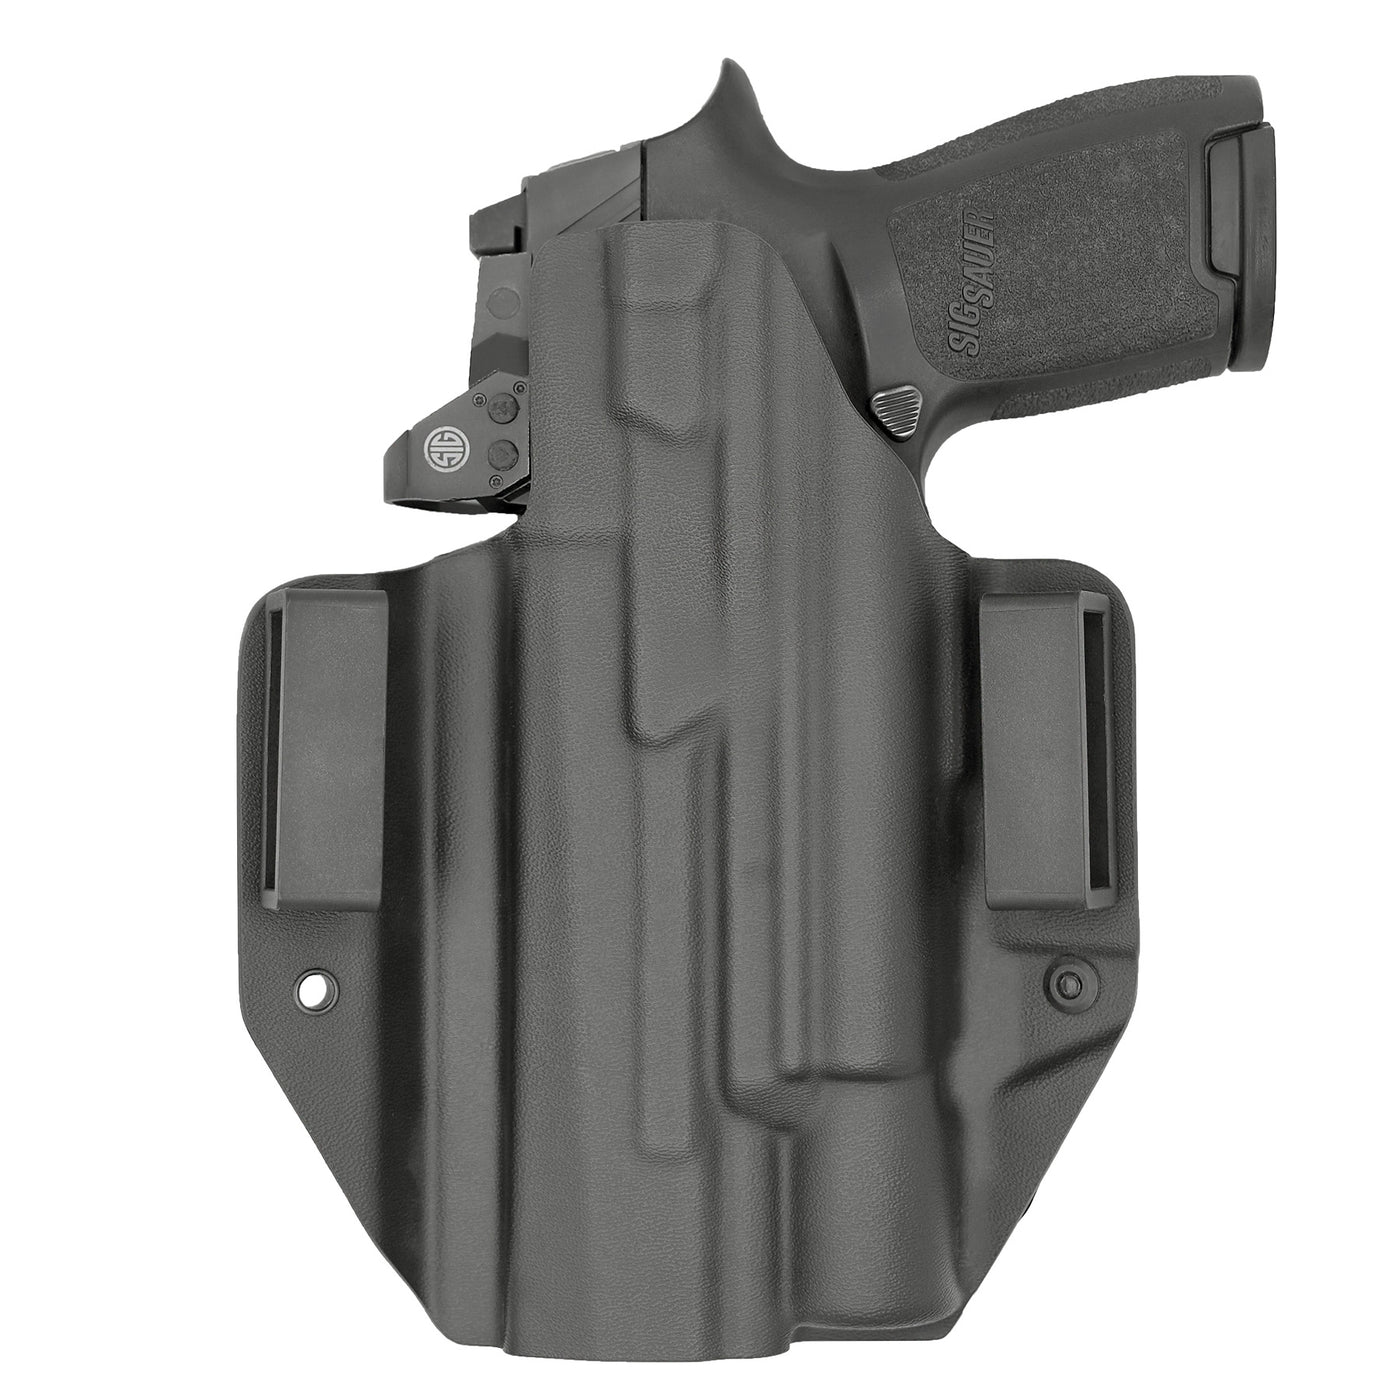 C&G Holsters Quickship OWB Tactical SIG P320/X5 Surefire X300 in holstered position back view